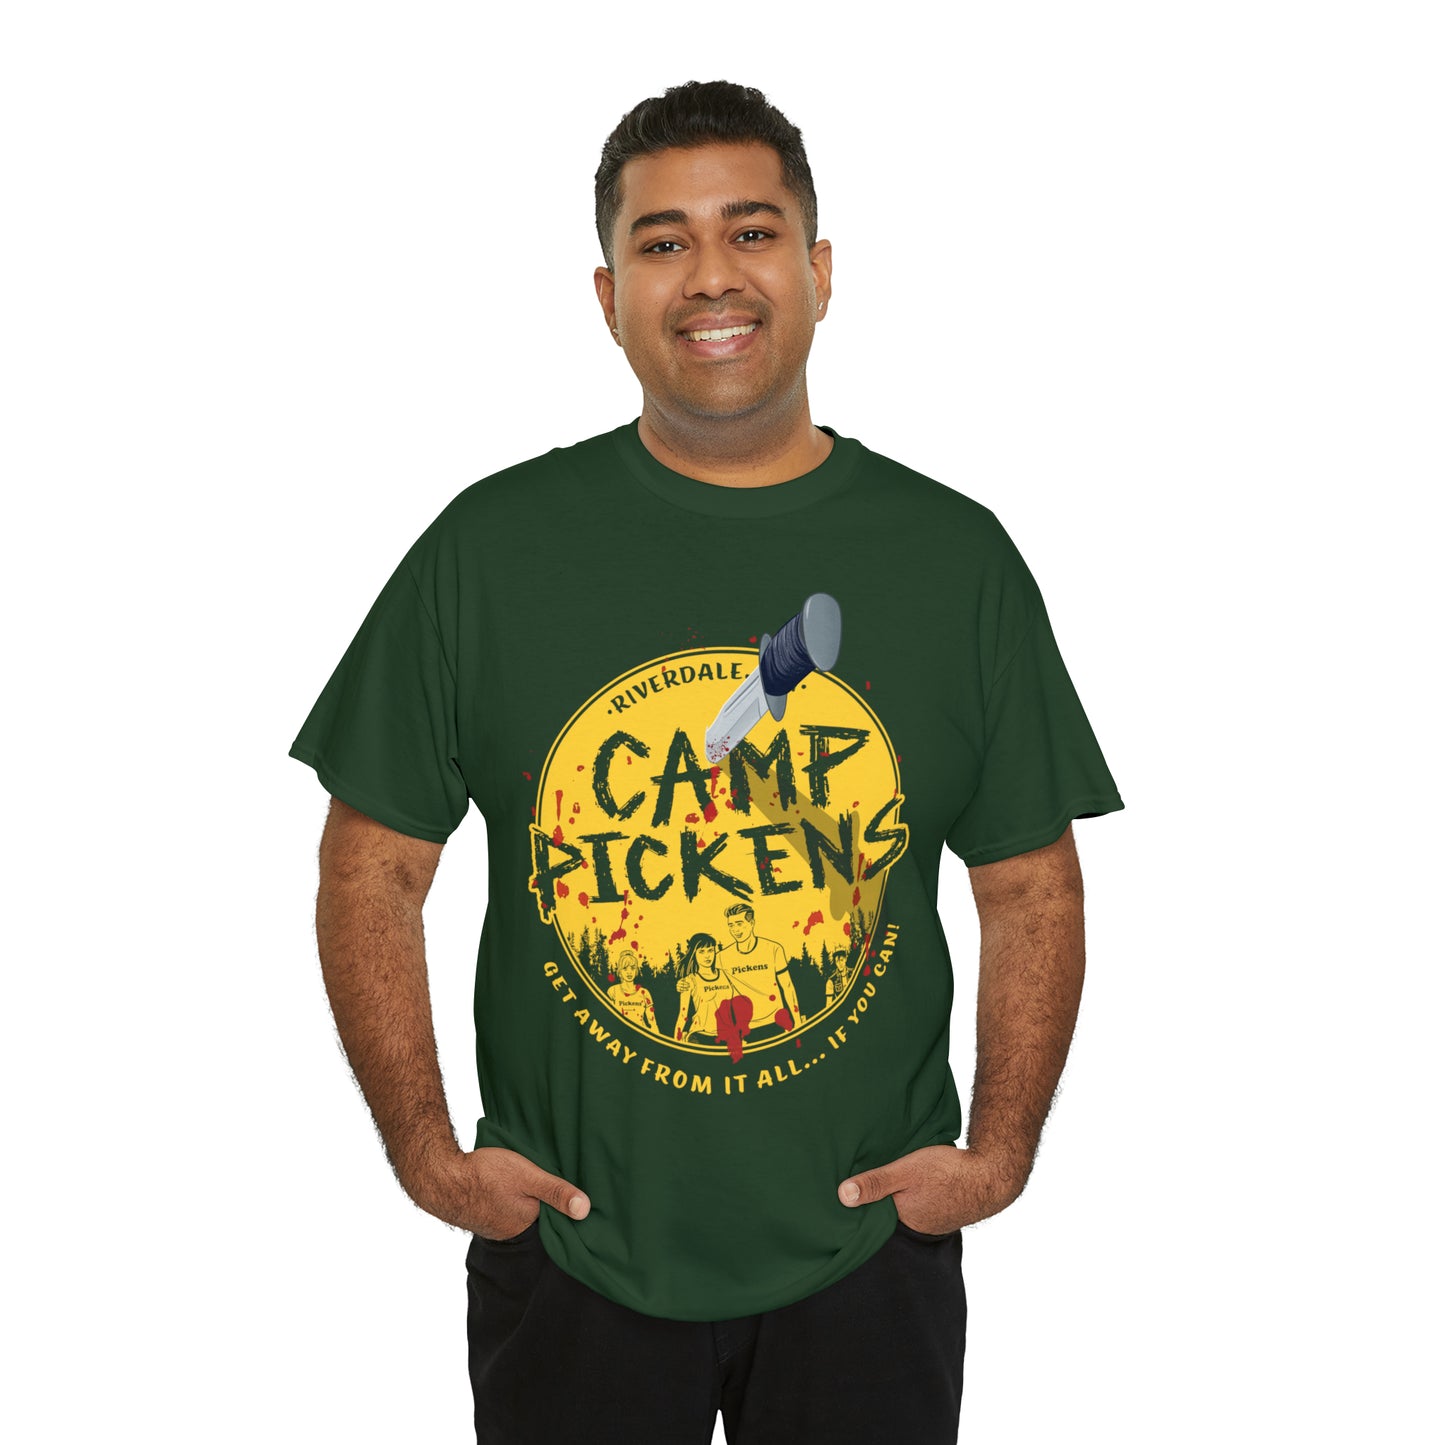 Riverdale Camp Pickens Graphic T-Shirt (Unisex Heavy Cotton Tee) featuring Archie, Betty, Veronica, and Jughead